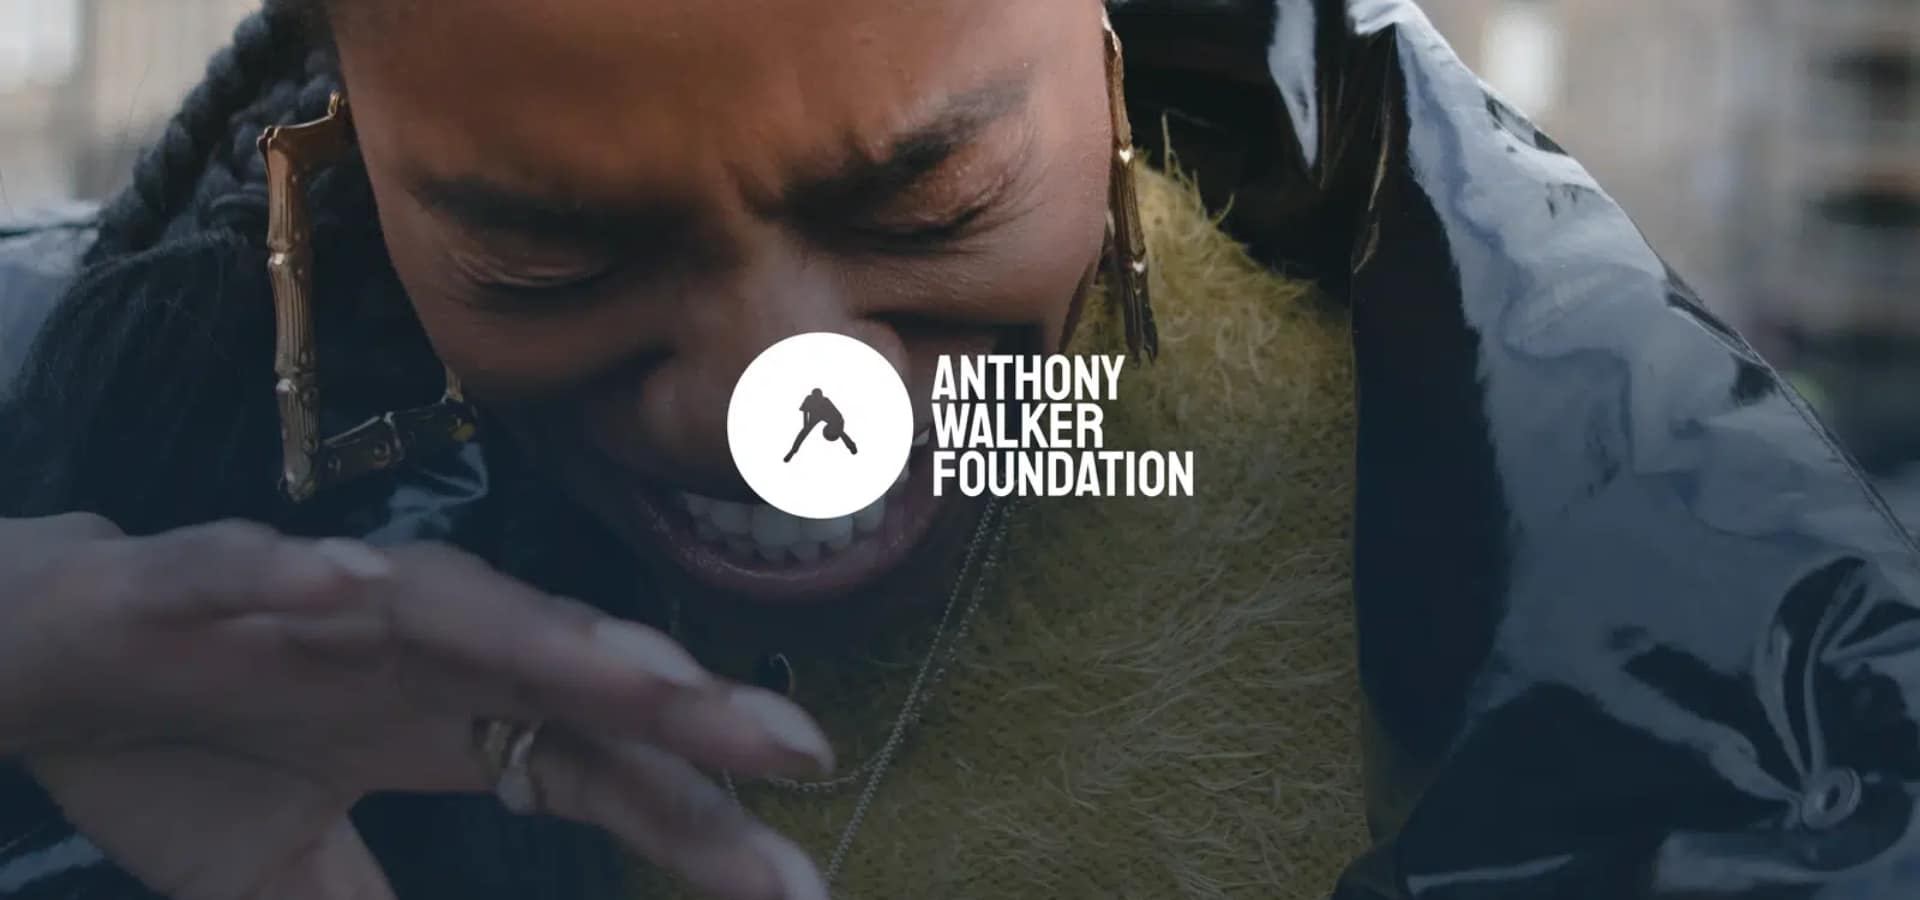 The hero image for Anthony Walker Foundation, a project of Liverpool based design agency, Hopeful Studio.